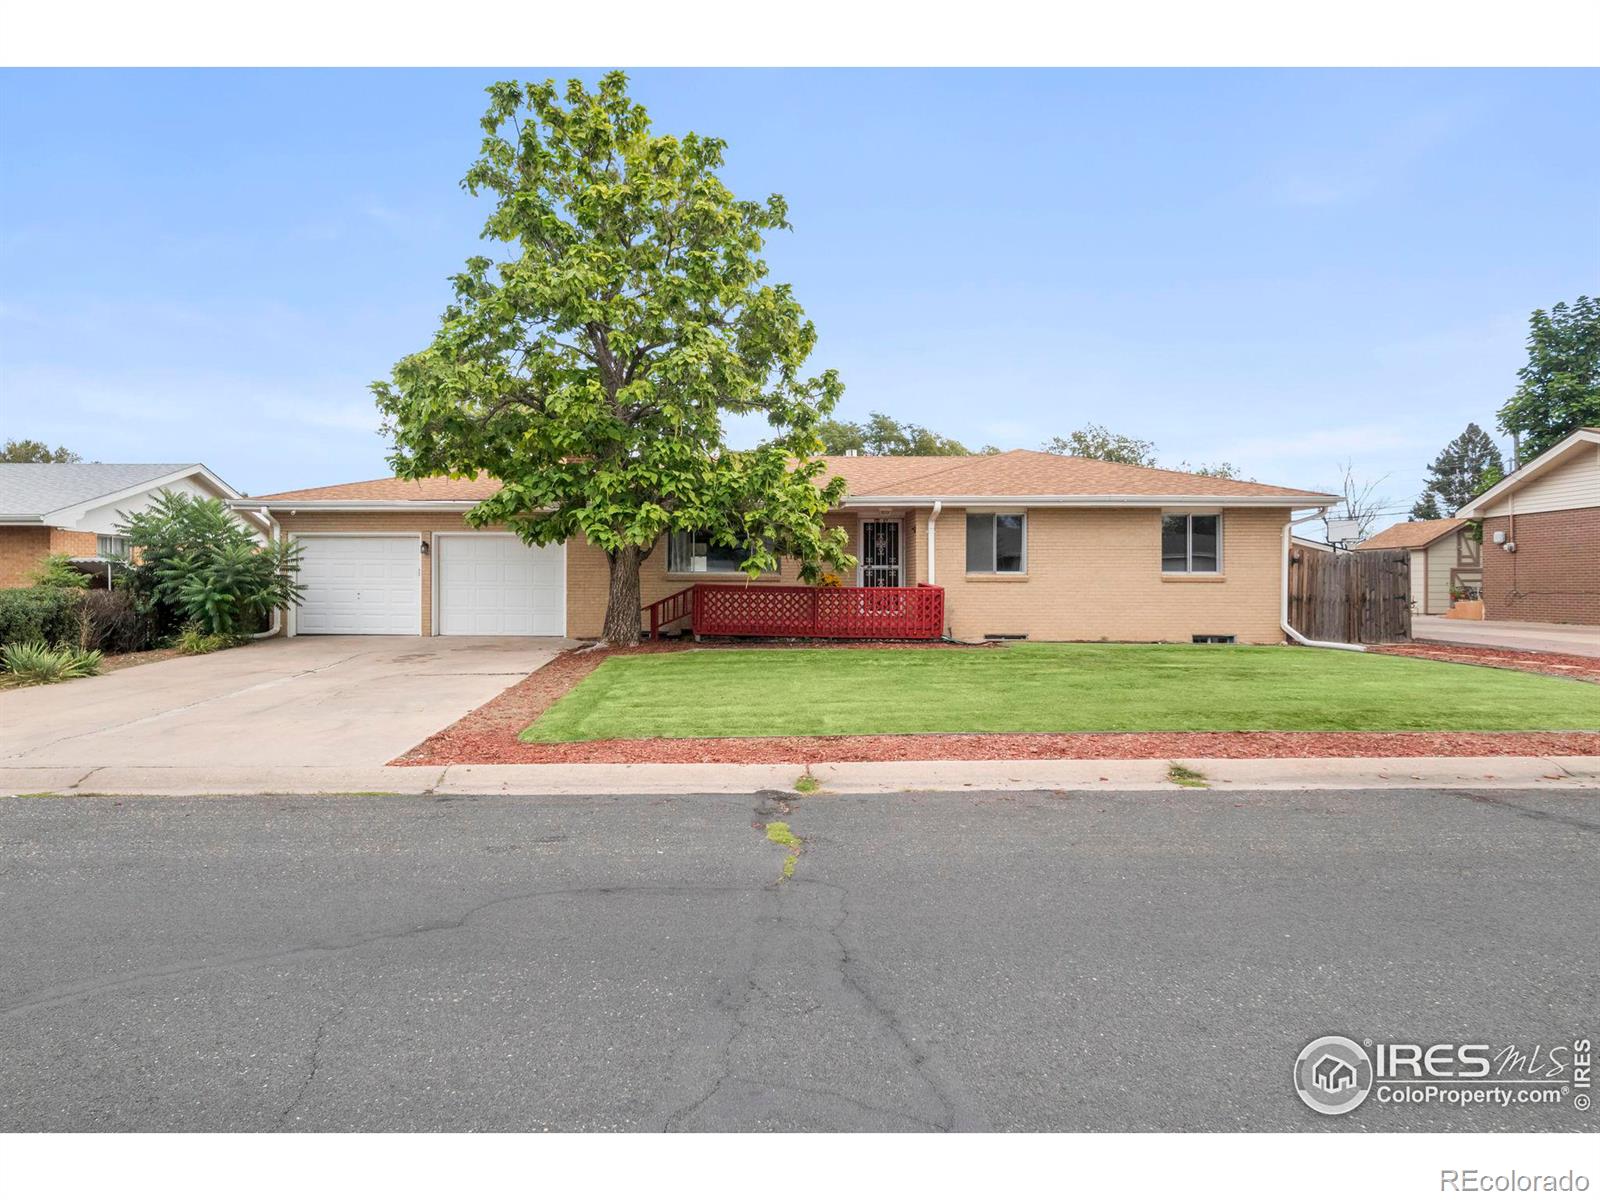 814  36th Avenue, greeley MLS: 123456789996663 Beds: 5 Baths: 3 Price: $420,000